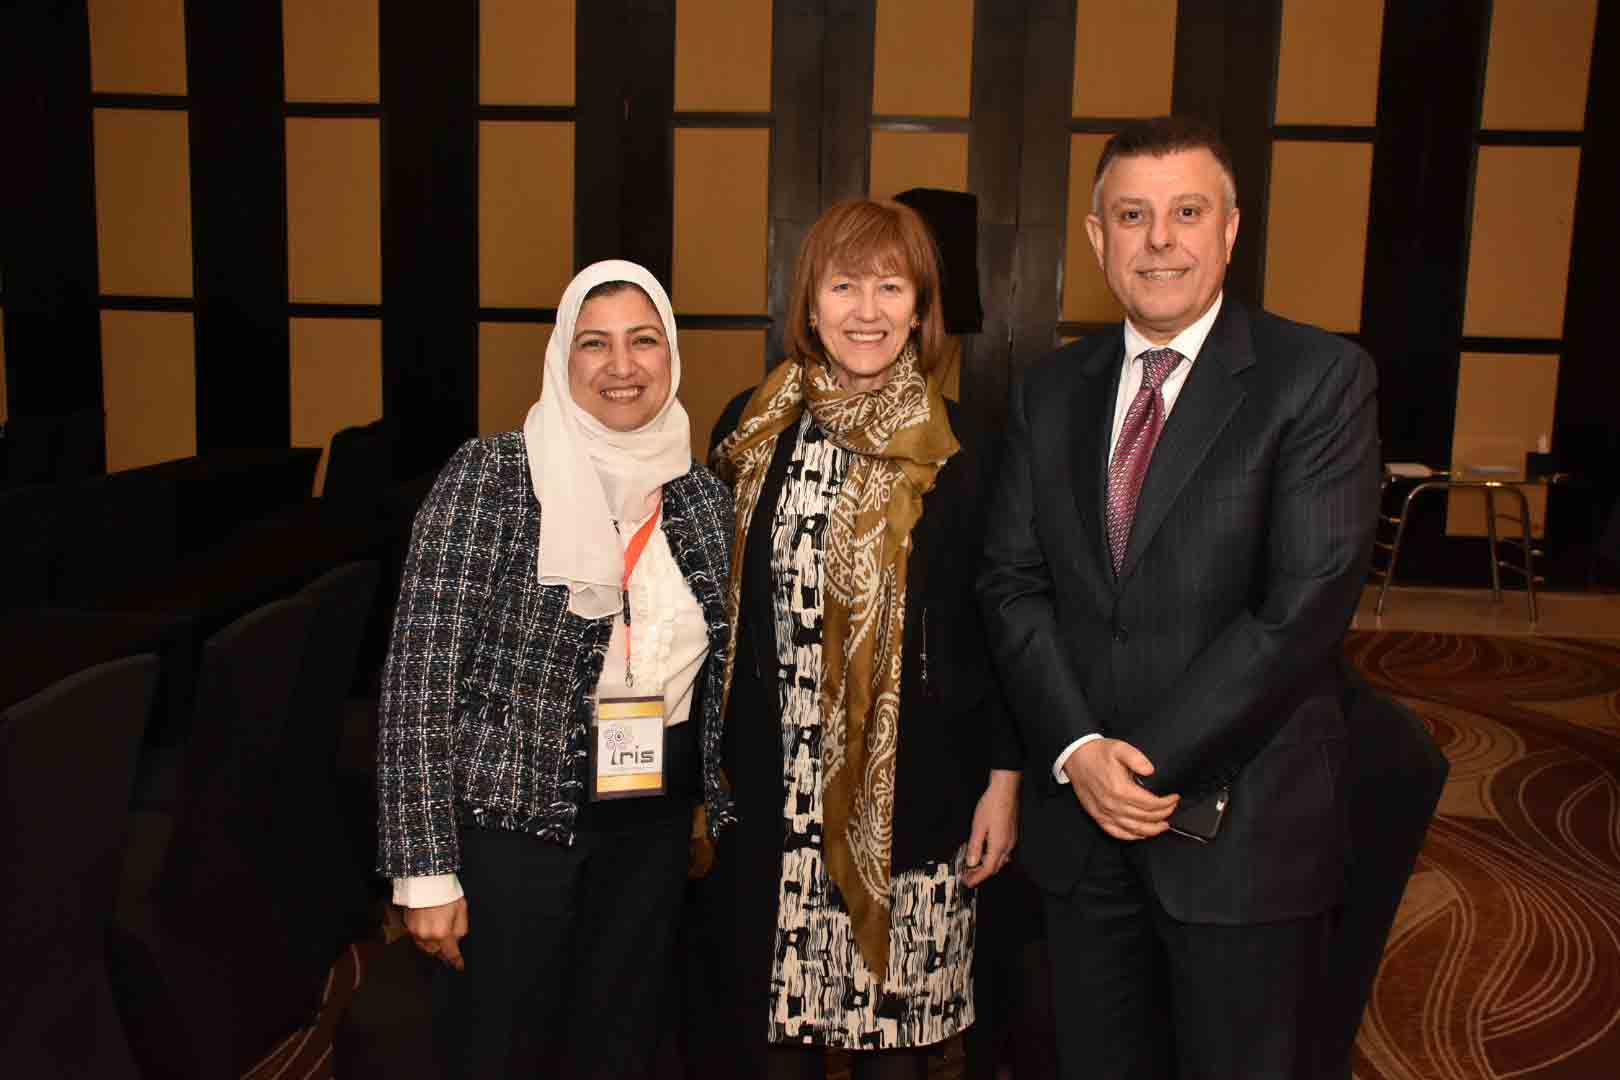 40th Annual Conference of Faculty of Medicine discusses the internationalization of education in Egypt